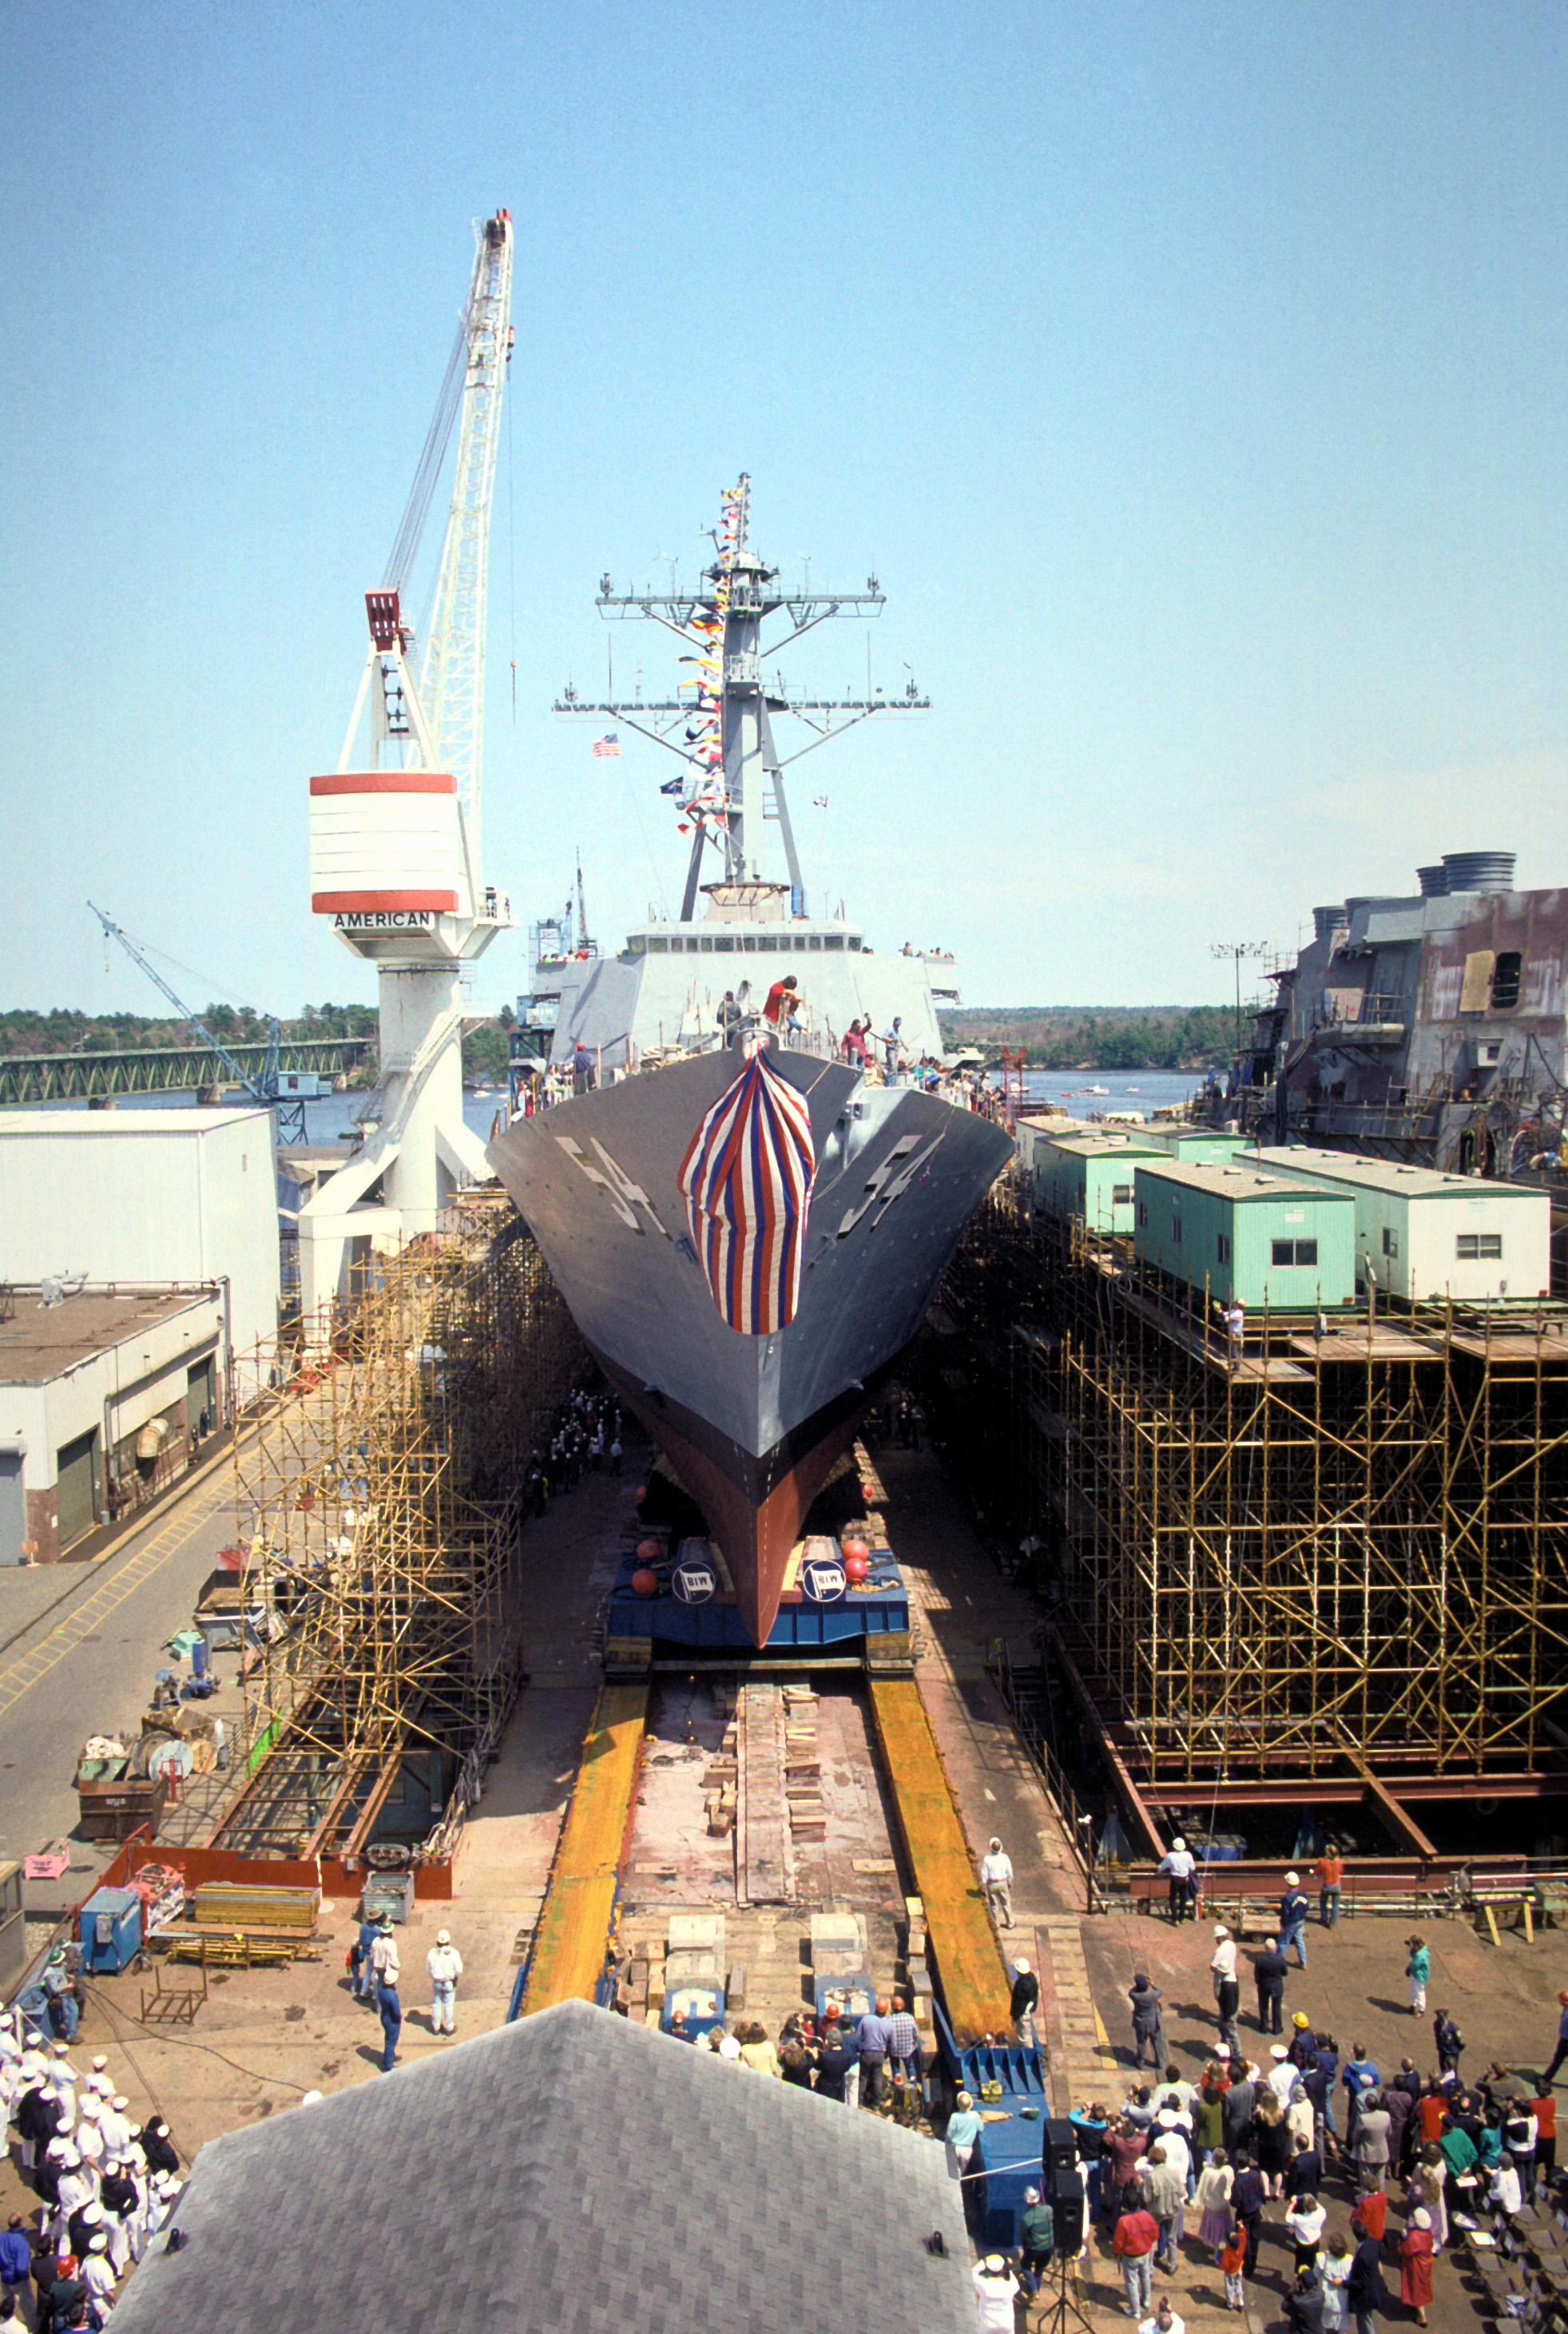 File:The guided missile destroyer CURTIS WILBUR (DDG-54) slides down the ways into the water during its launching at the Bath Iron Works Co. shipyard - DPLA - 2ac442367a5032b02a457eeafeafa567.jpeg - Wikimedia Commons